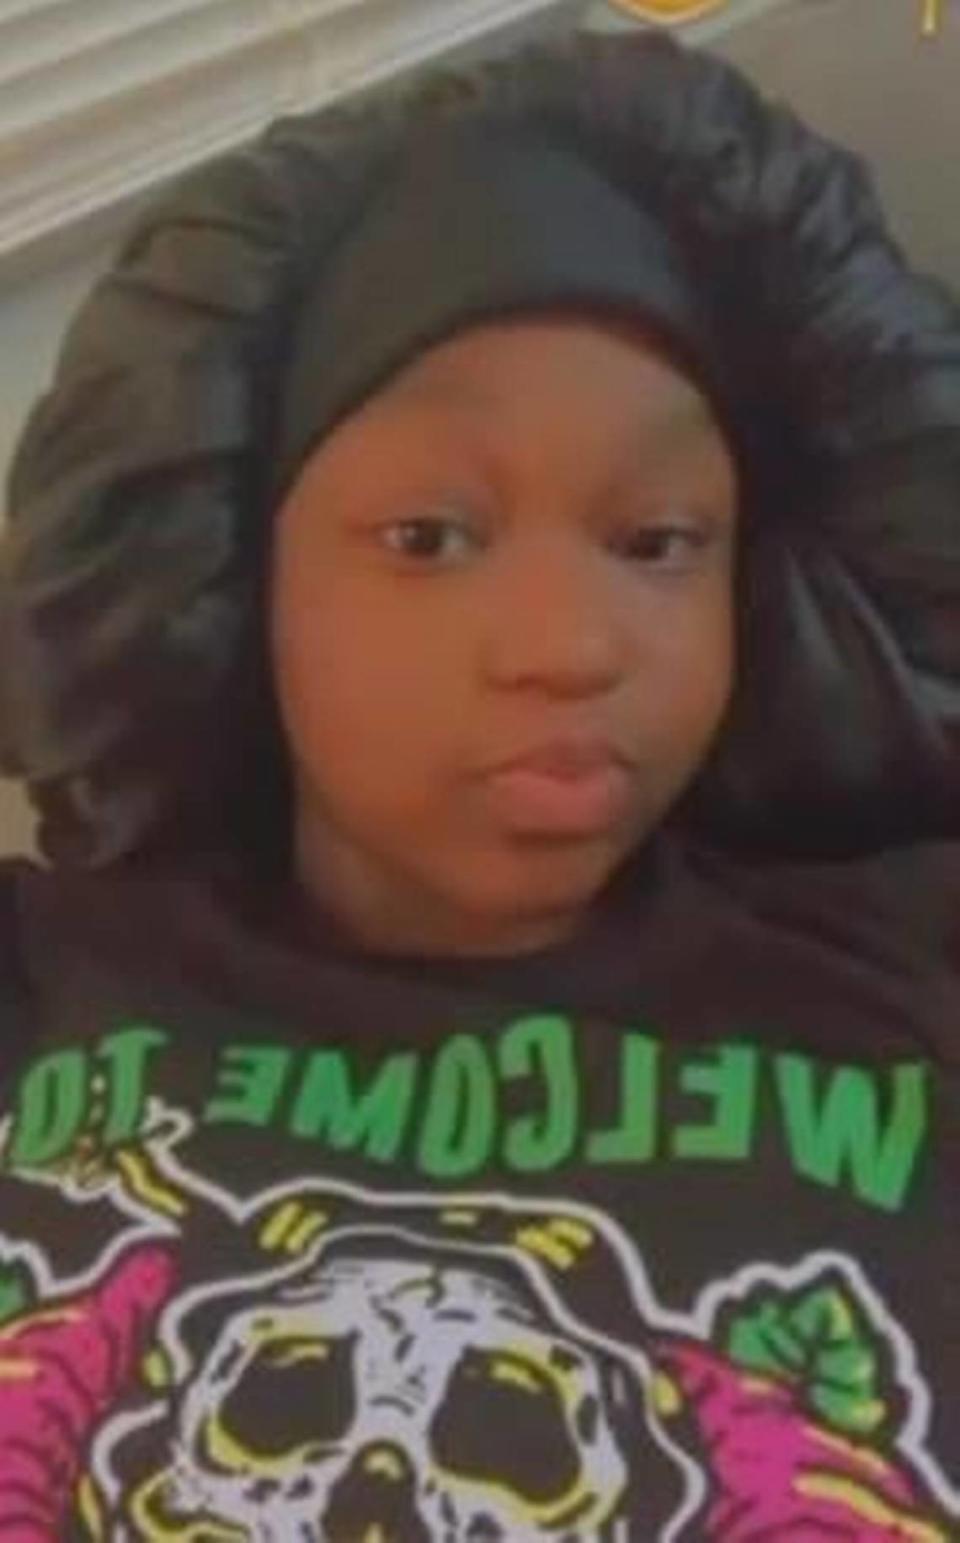 The Richland County Sheriff’s Department is searching for 13-year-old Mekayla Martin.